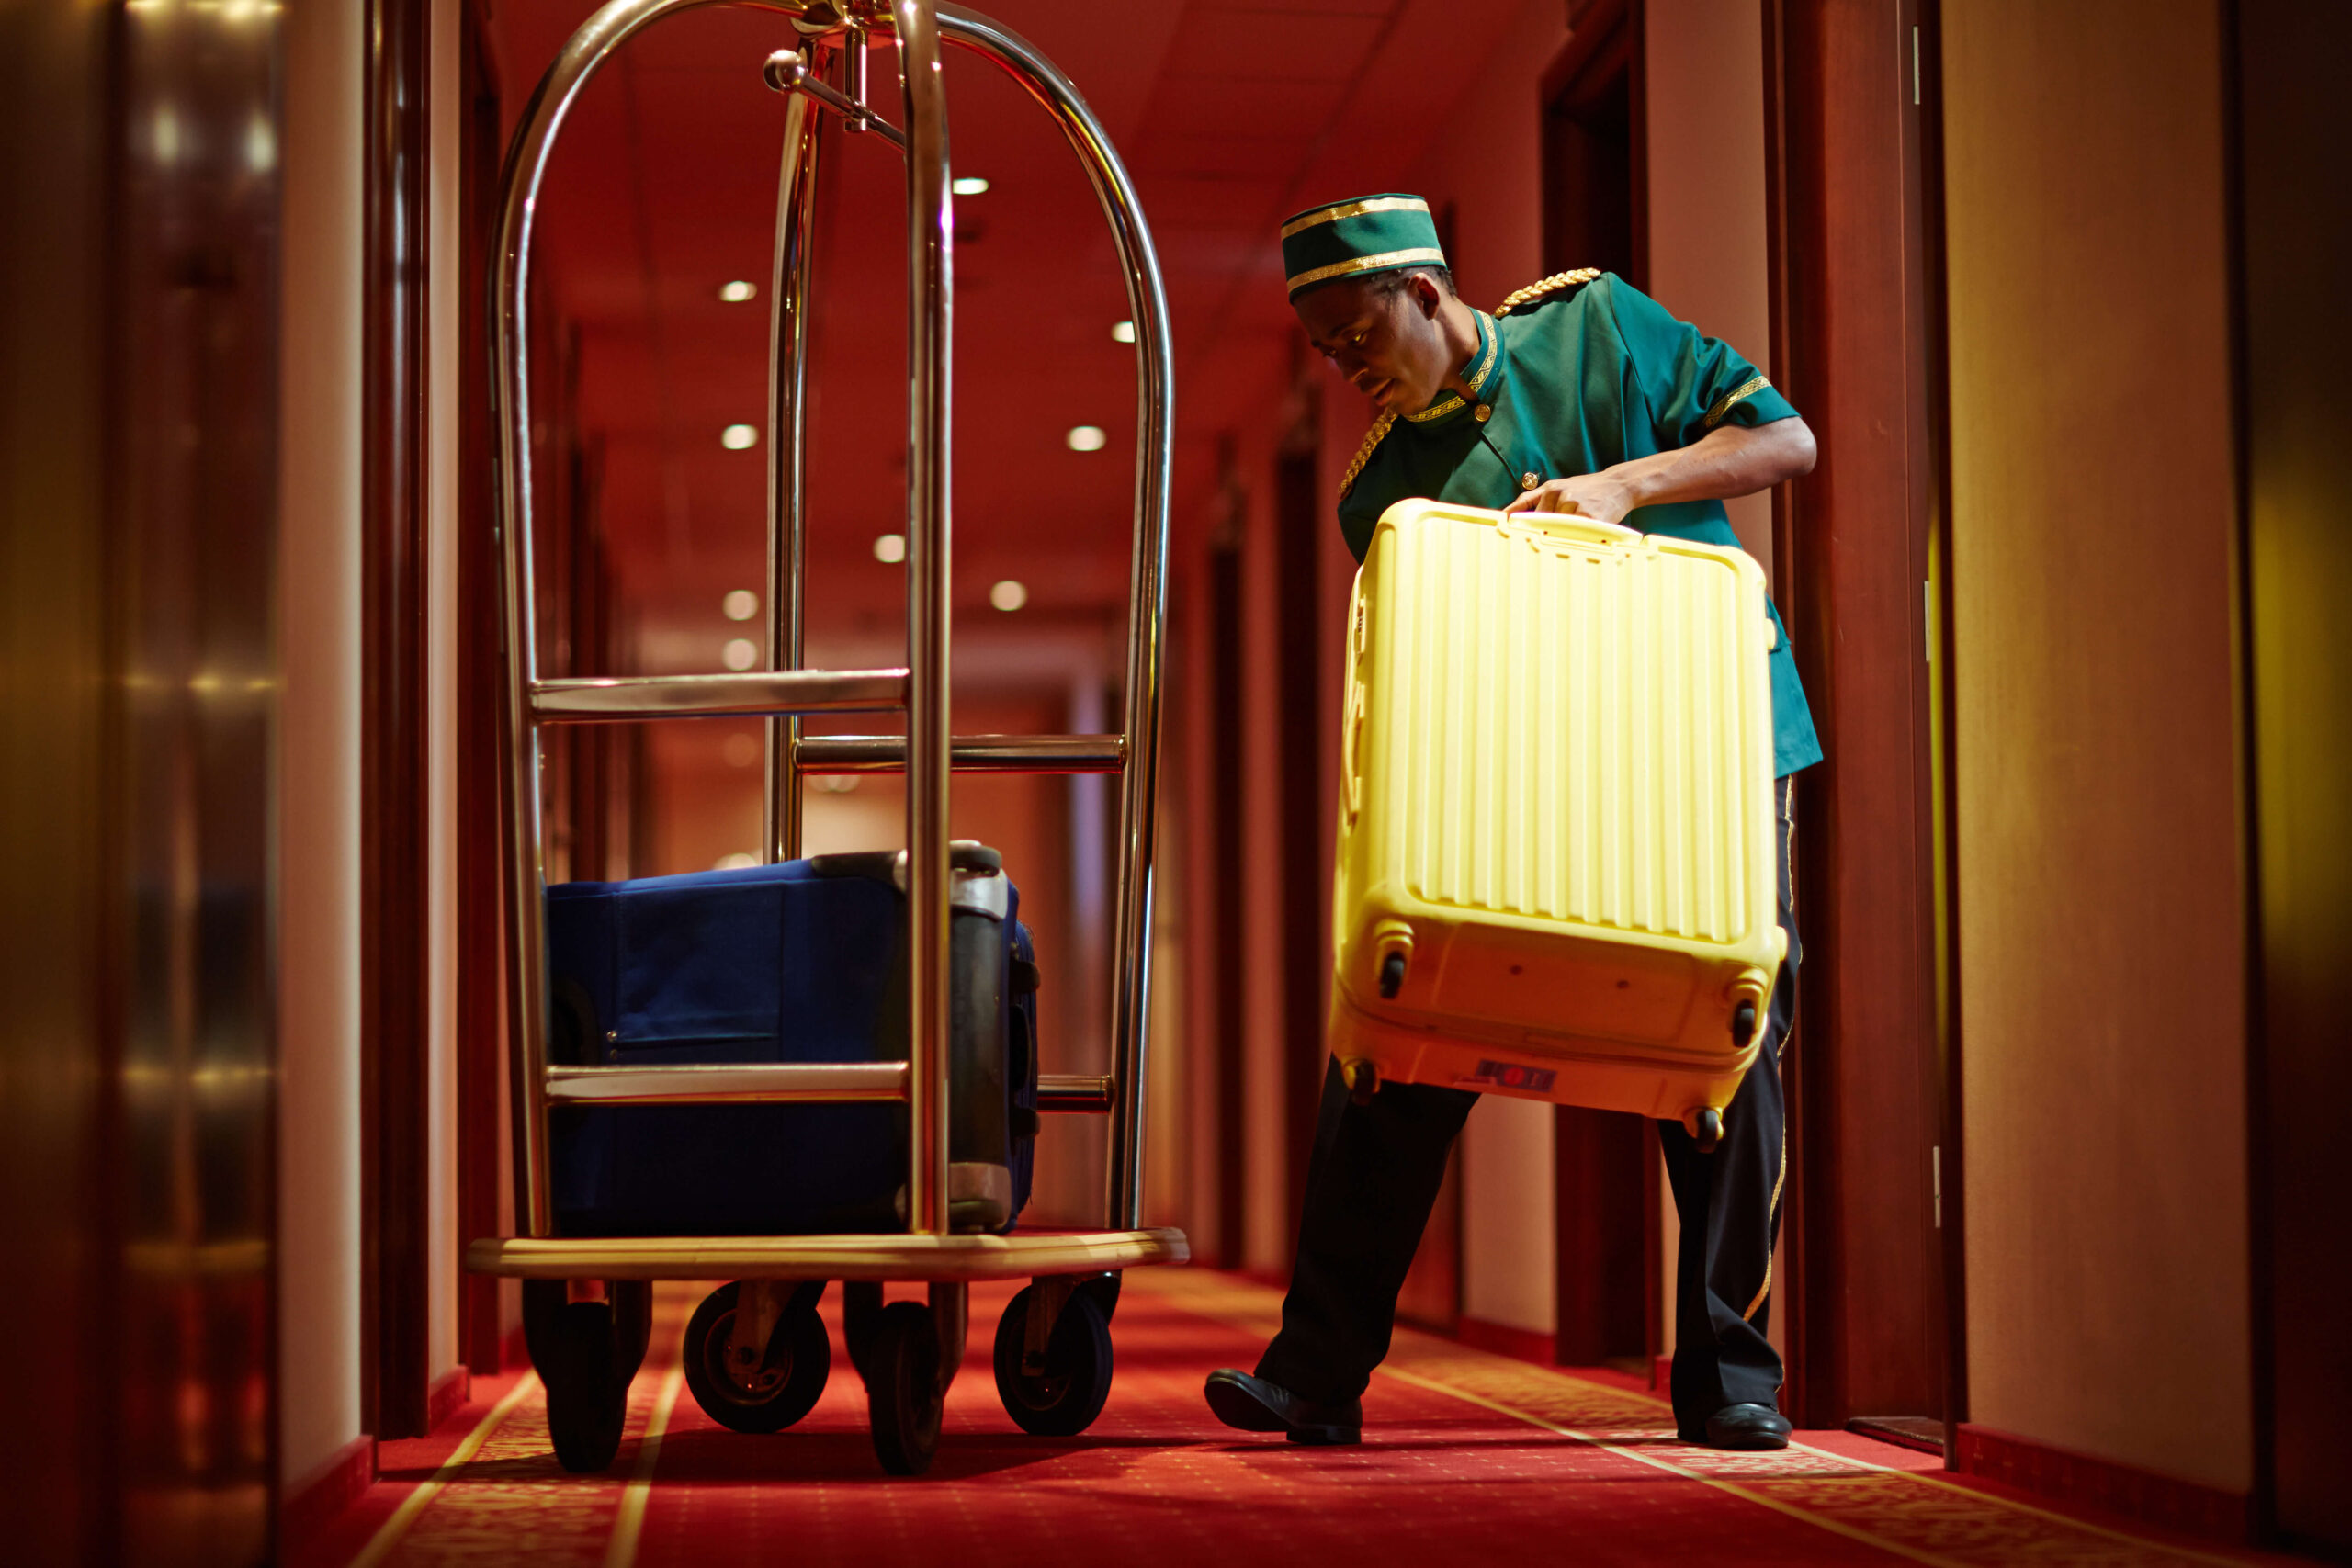 Bellhop loading a cart with luggage.